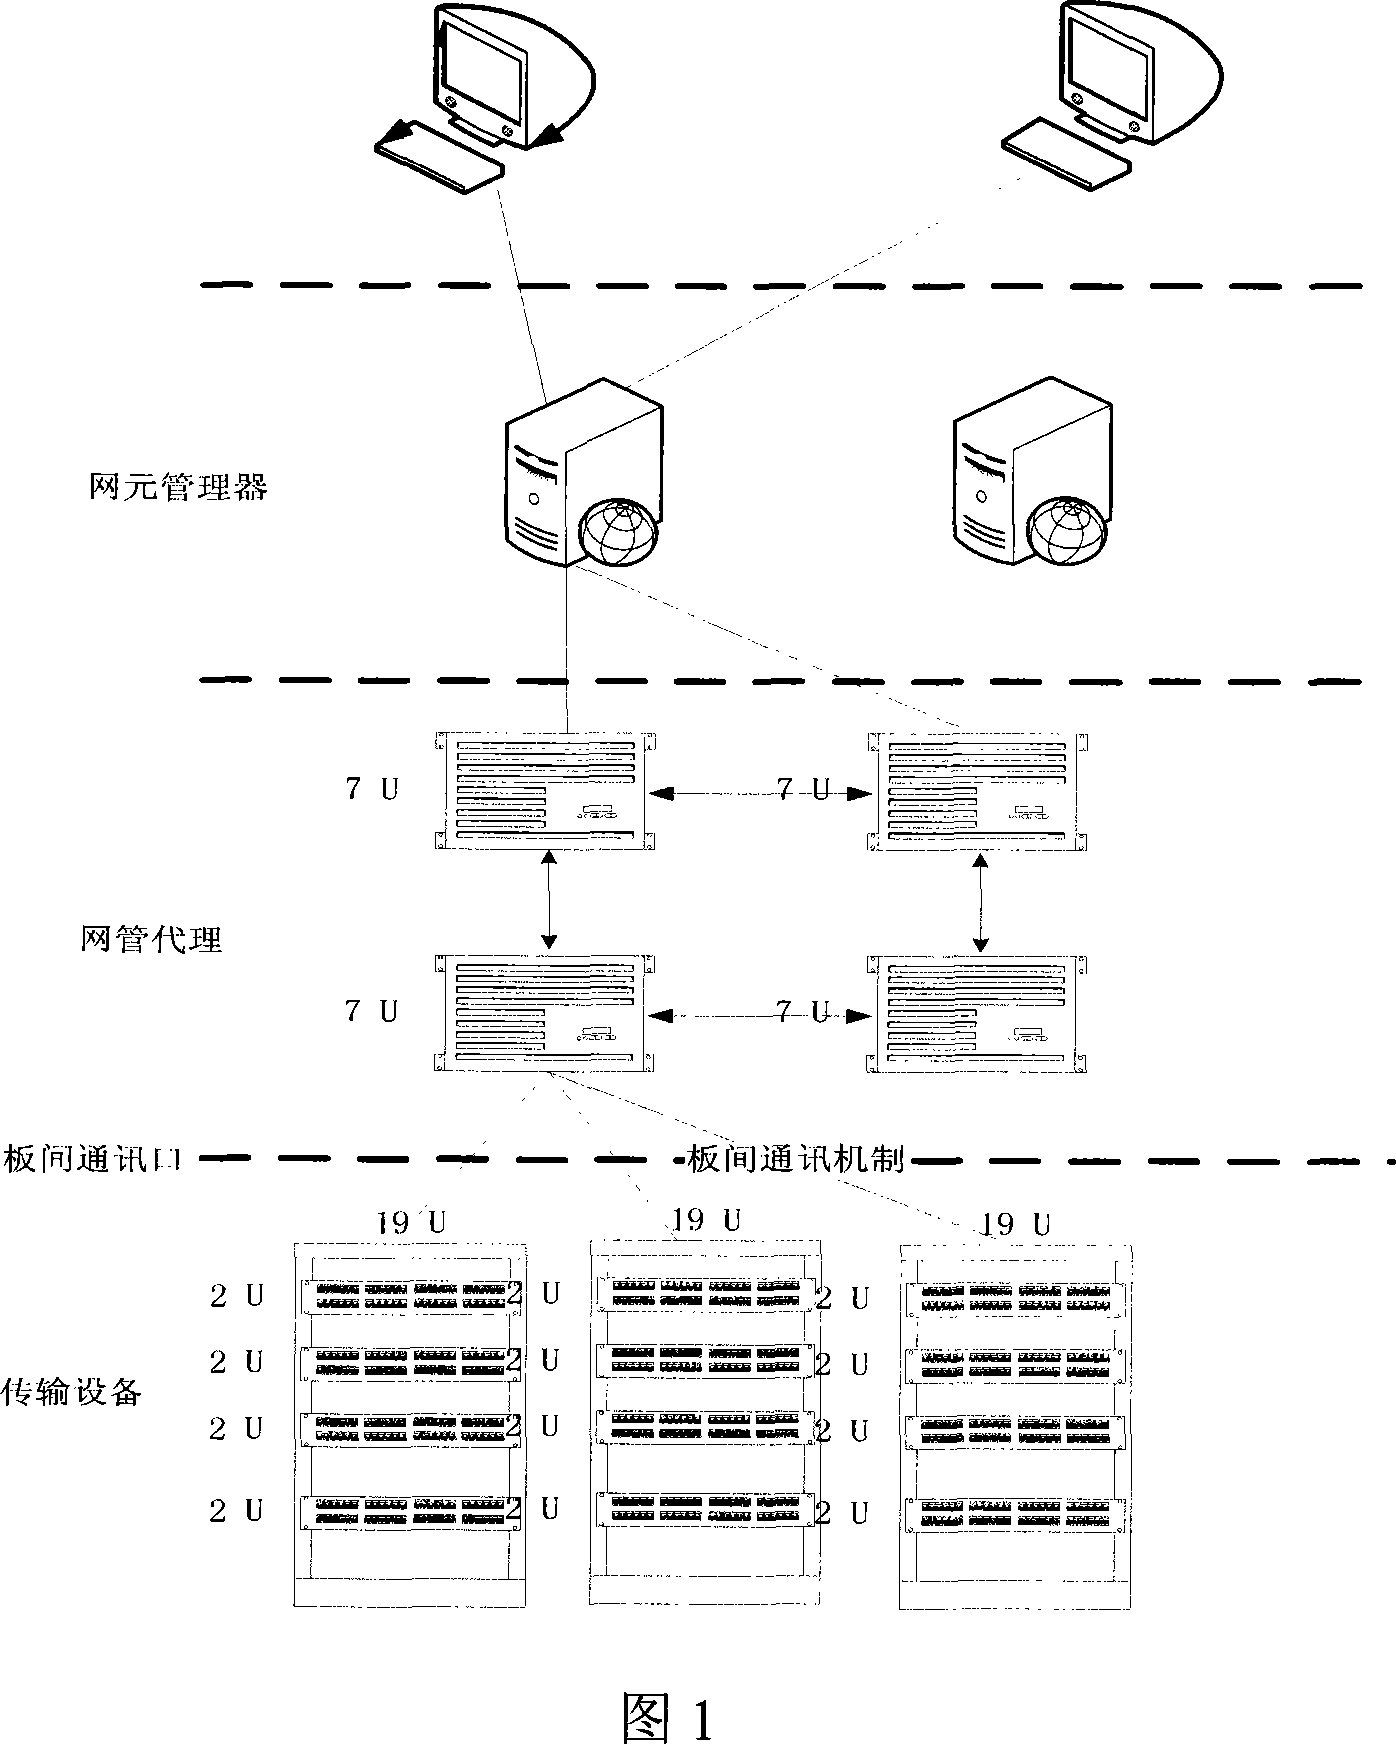 Data transmission and receiving method between network management system and transmission device